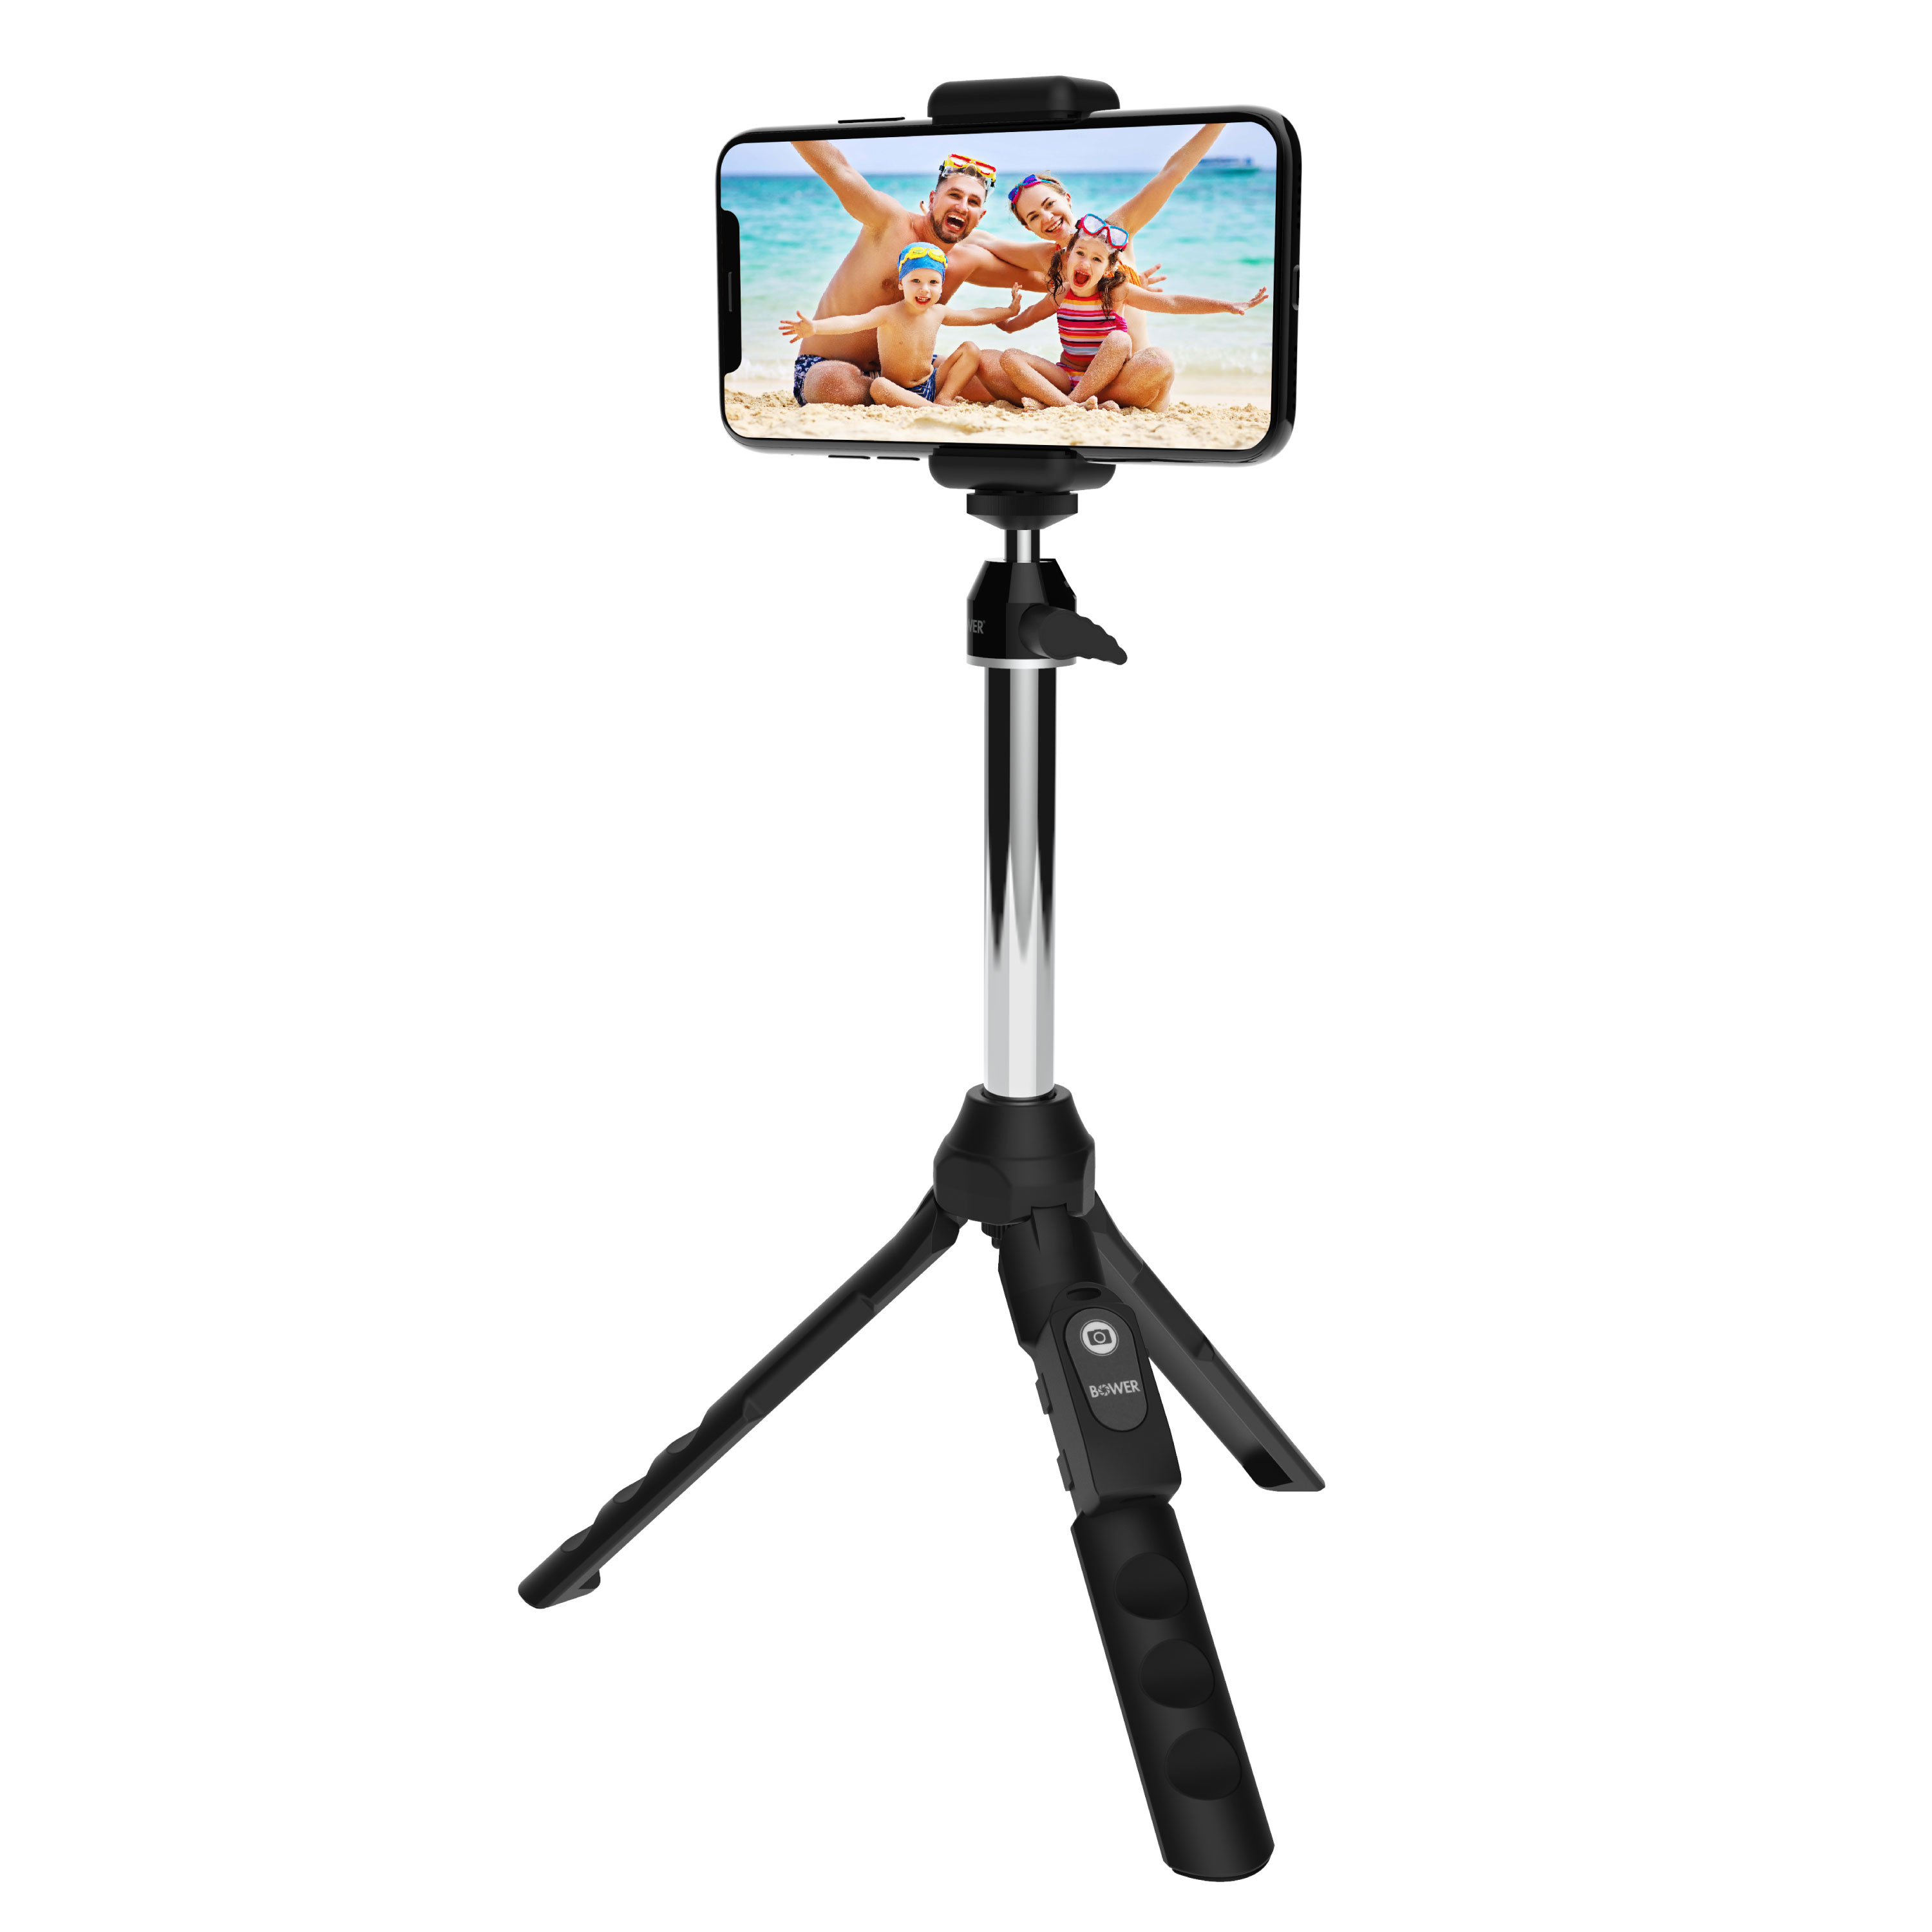 Bower 6 -in-1 Multi Selfie Tripod with Smartphone, GoPro Mount, and Rechargeable Wireless Remote, Black - image 2 of 7